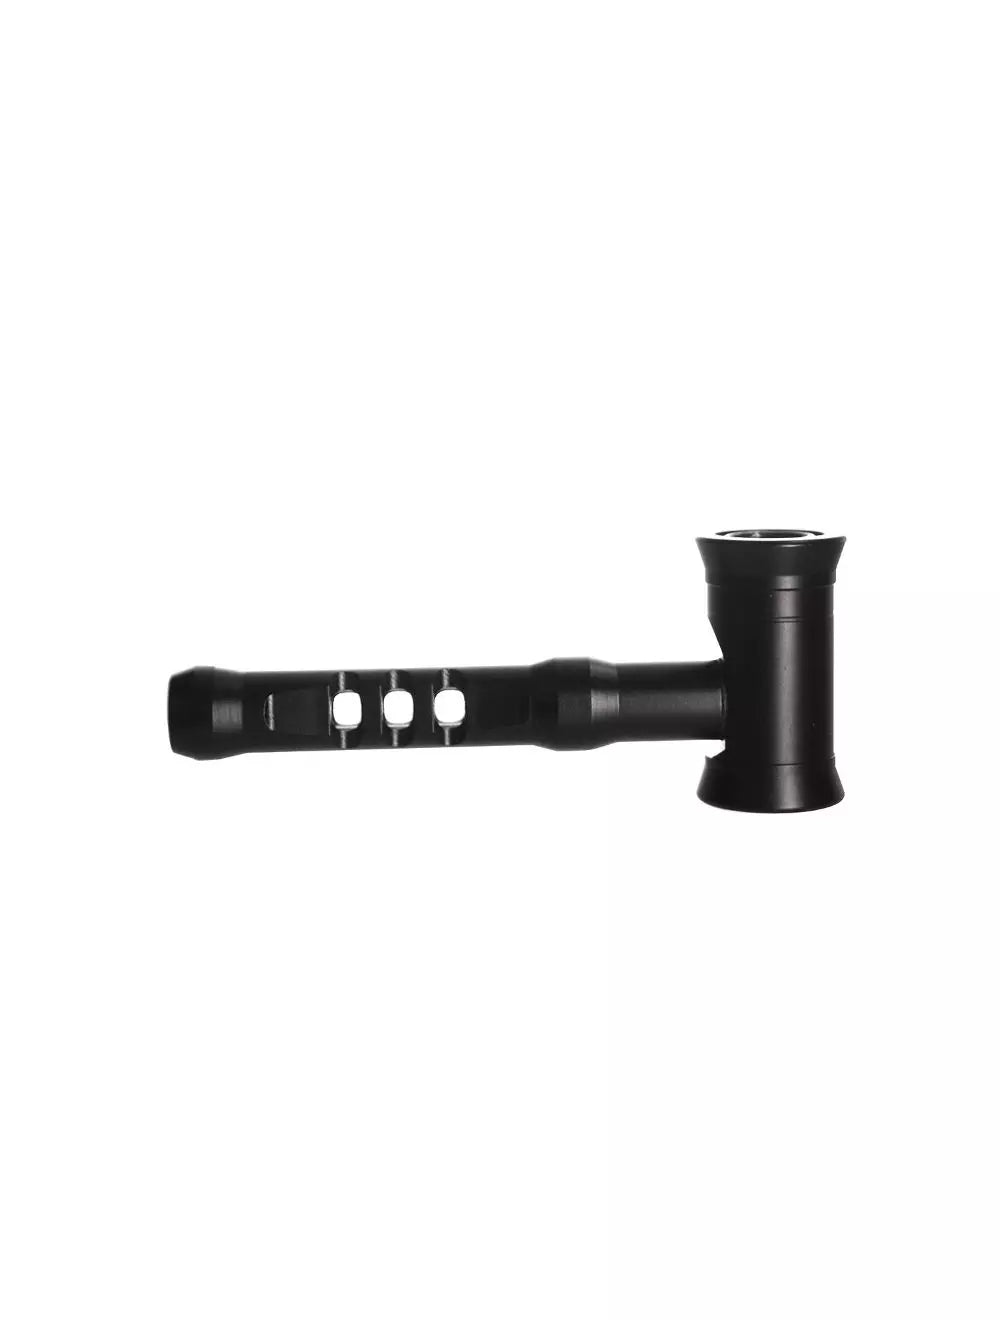 GLASS - 5.5" METAL ENCASED GLASS GAVEL PIPE yoga smokes yoga studio, delivery, delivery near me, yoga smokes smoke shop, find smoke shop, head shop near me, yoga studio, headshop, head shop, local smoke shop, psl, psl smoke shop, smoke shop, smokeshop, yoga, yoga studio, dispensary, local dispensary, smokeshop near me, port saint lucie, florida, port st lucie, lounge, life, highlife, love, stoned, highsociety. Yoga Smokes